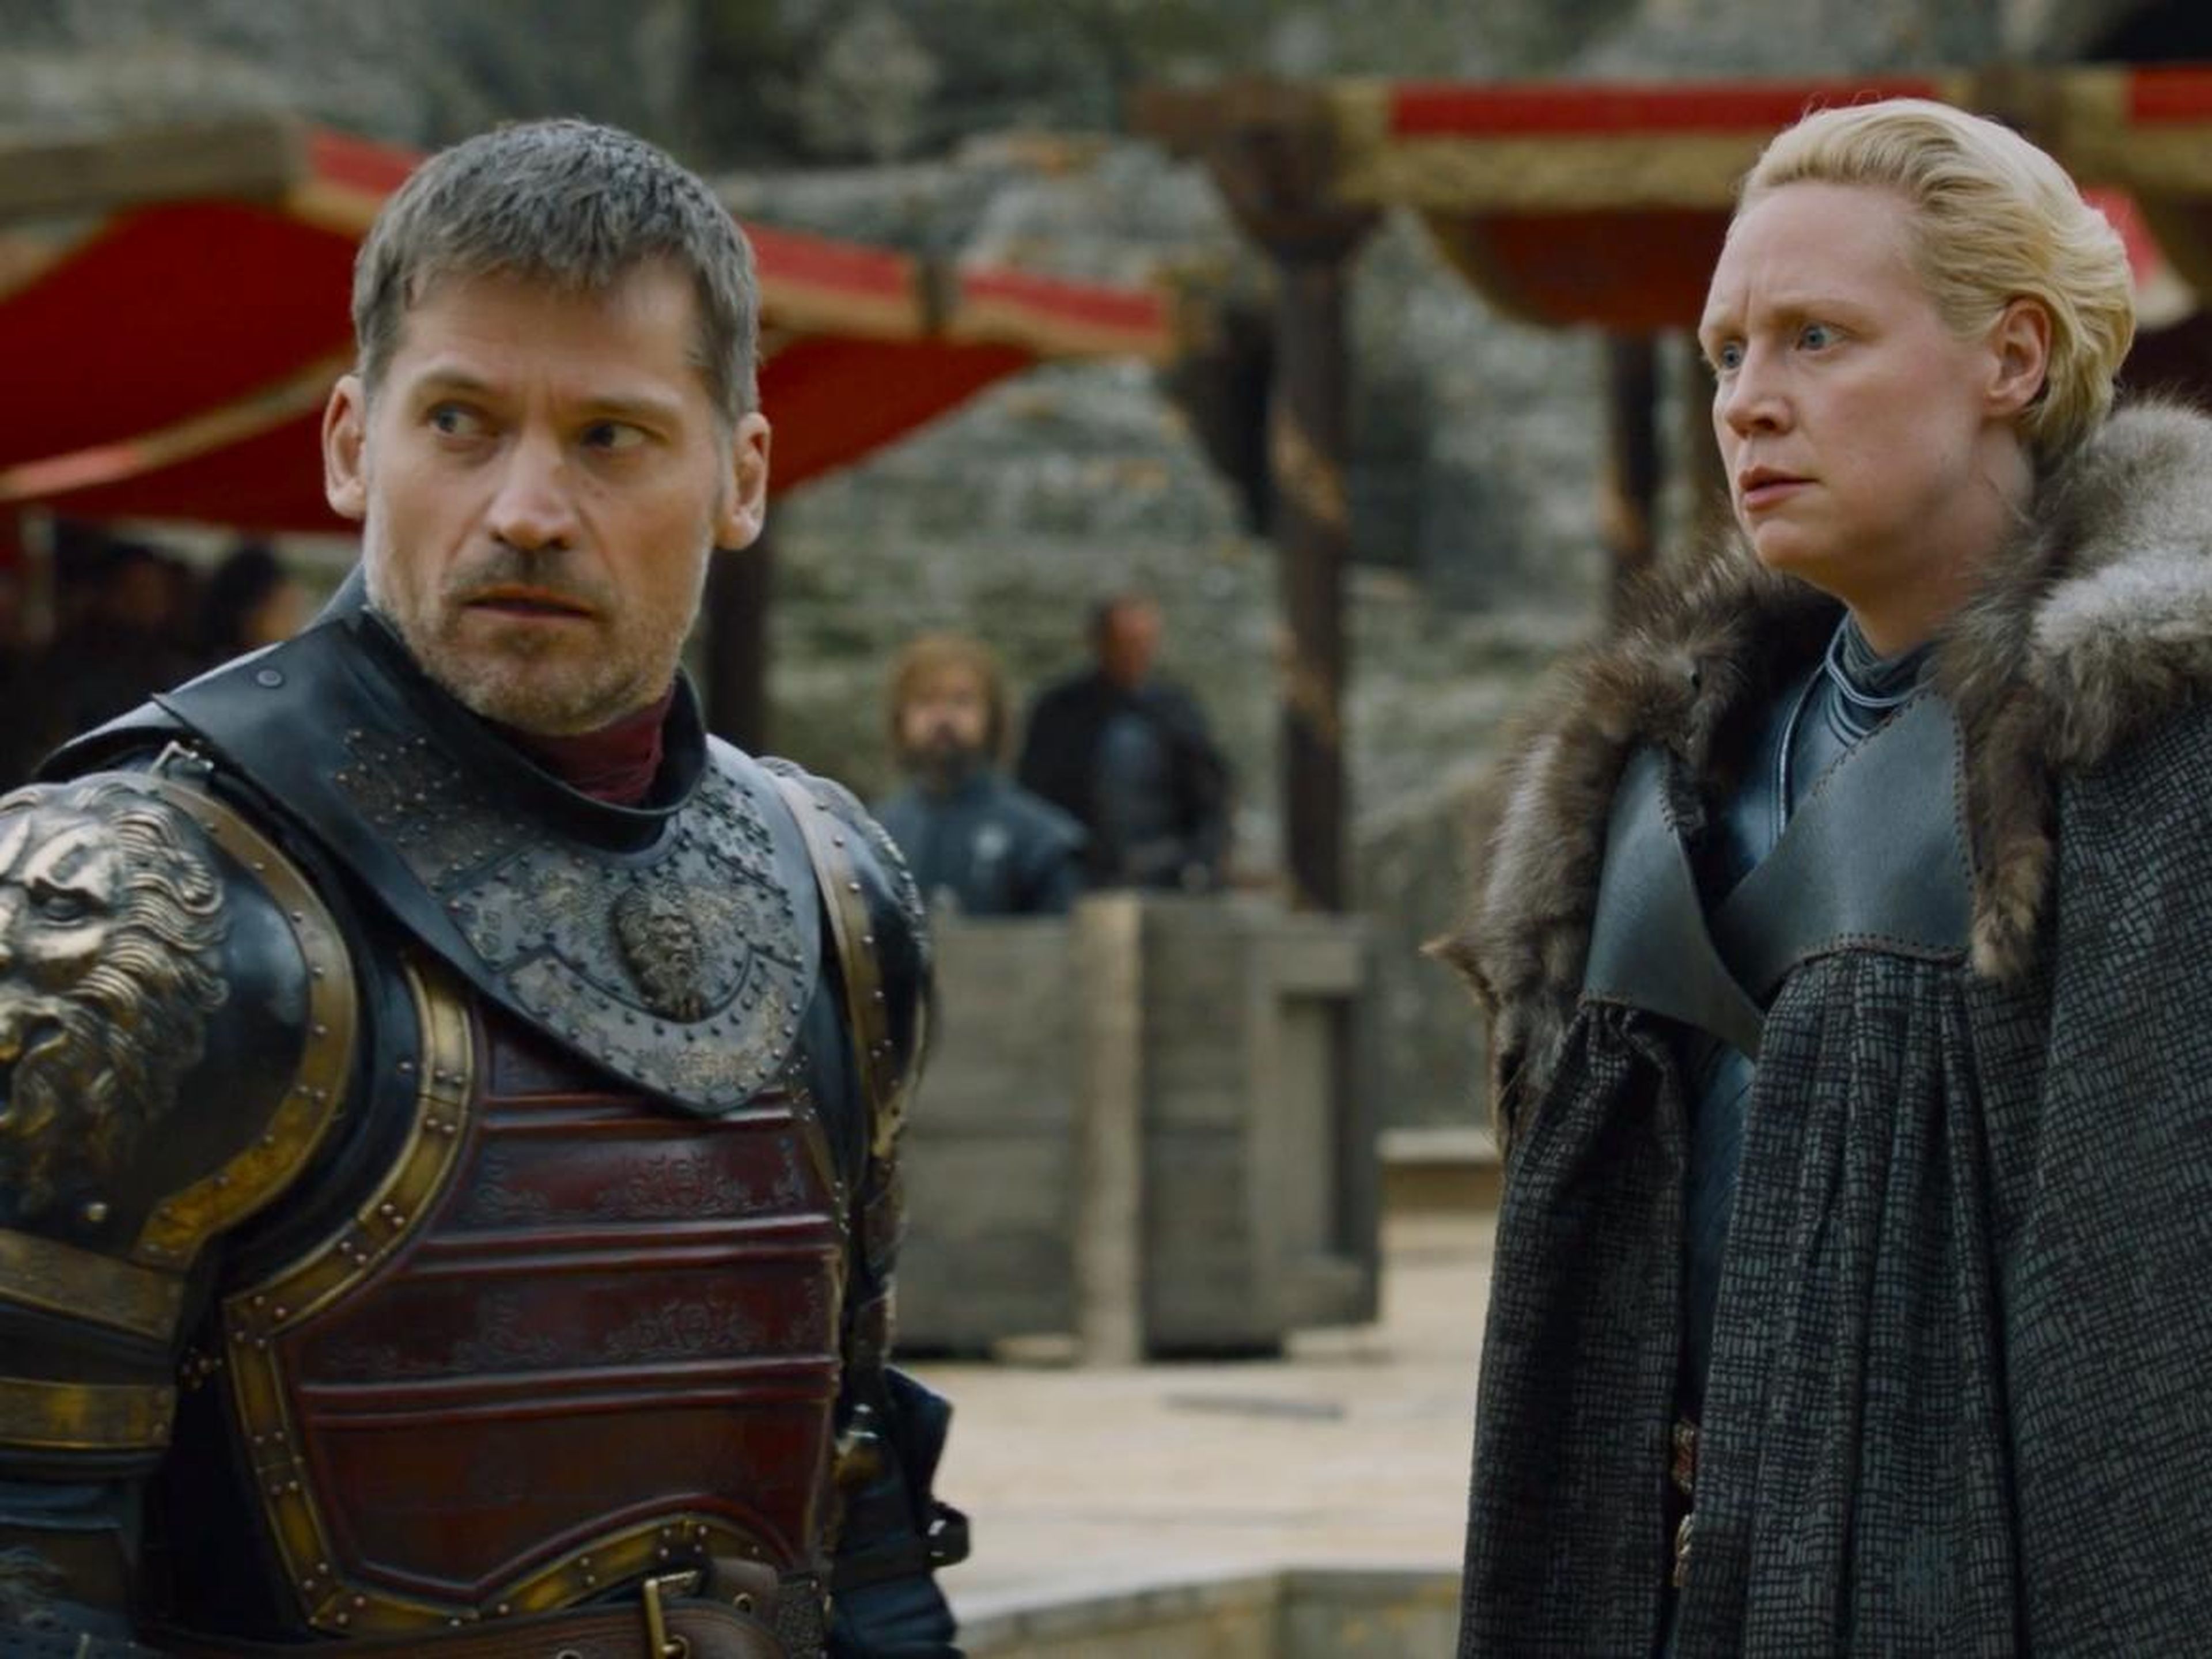 Jaime and Brienne on "Game of Thrones" season seven, episode seven, "The Dragon and the Wolf."